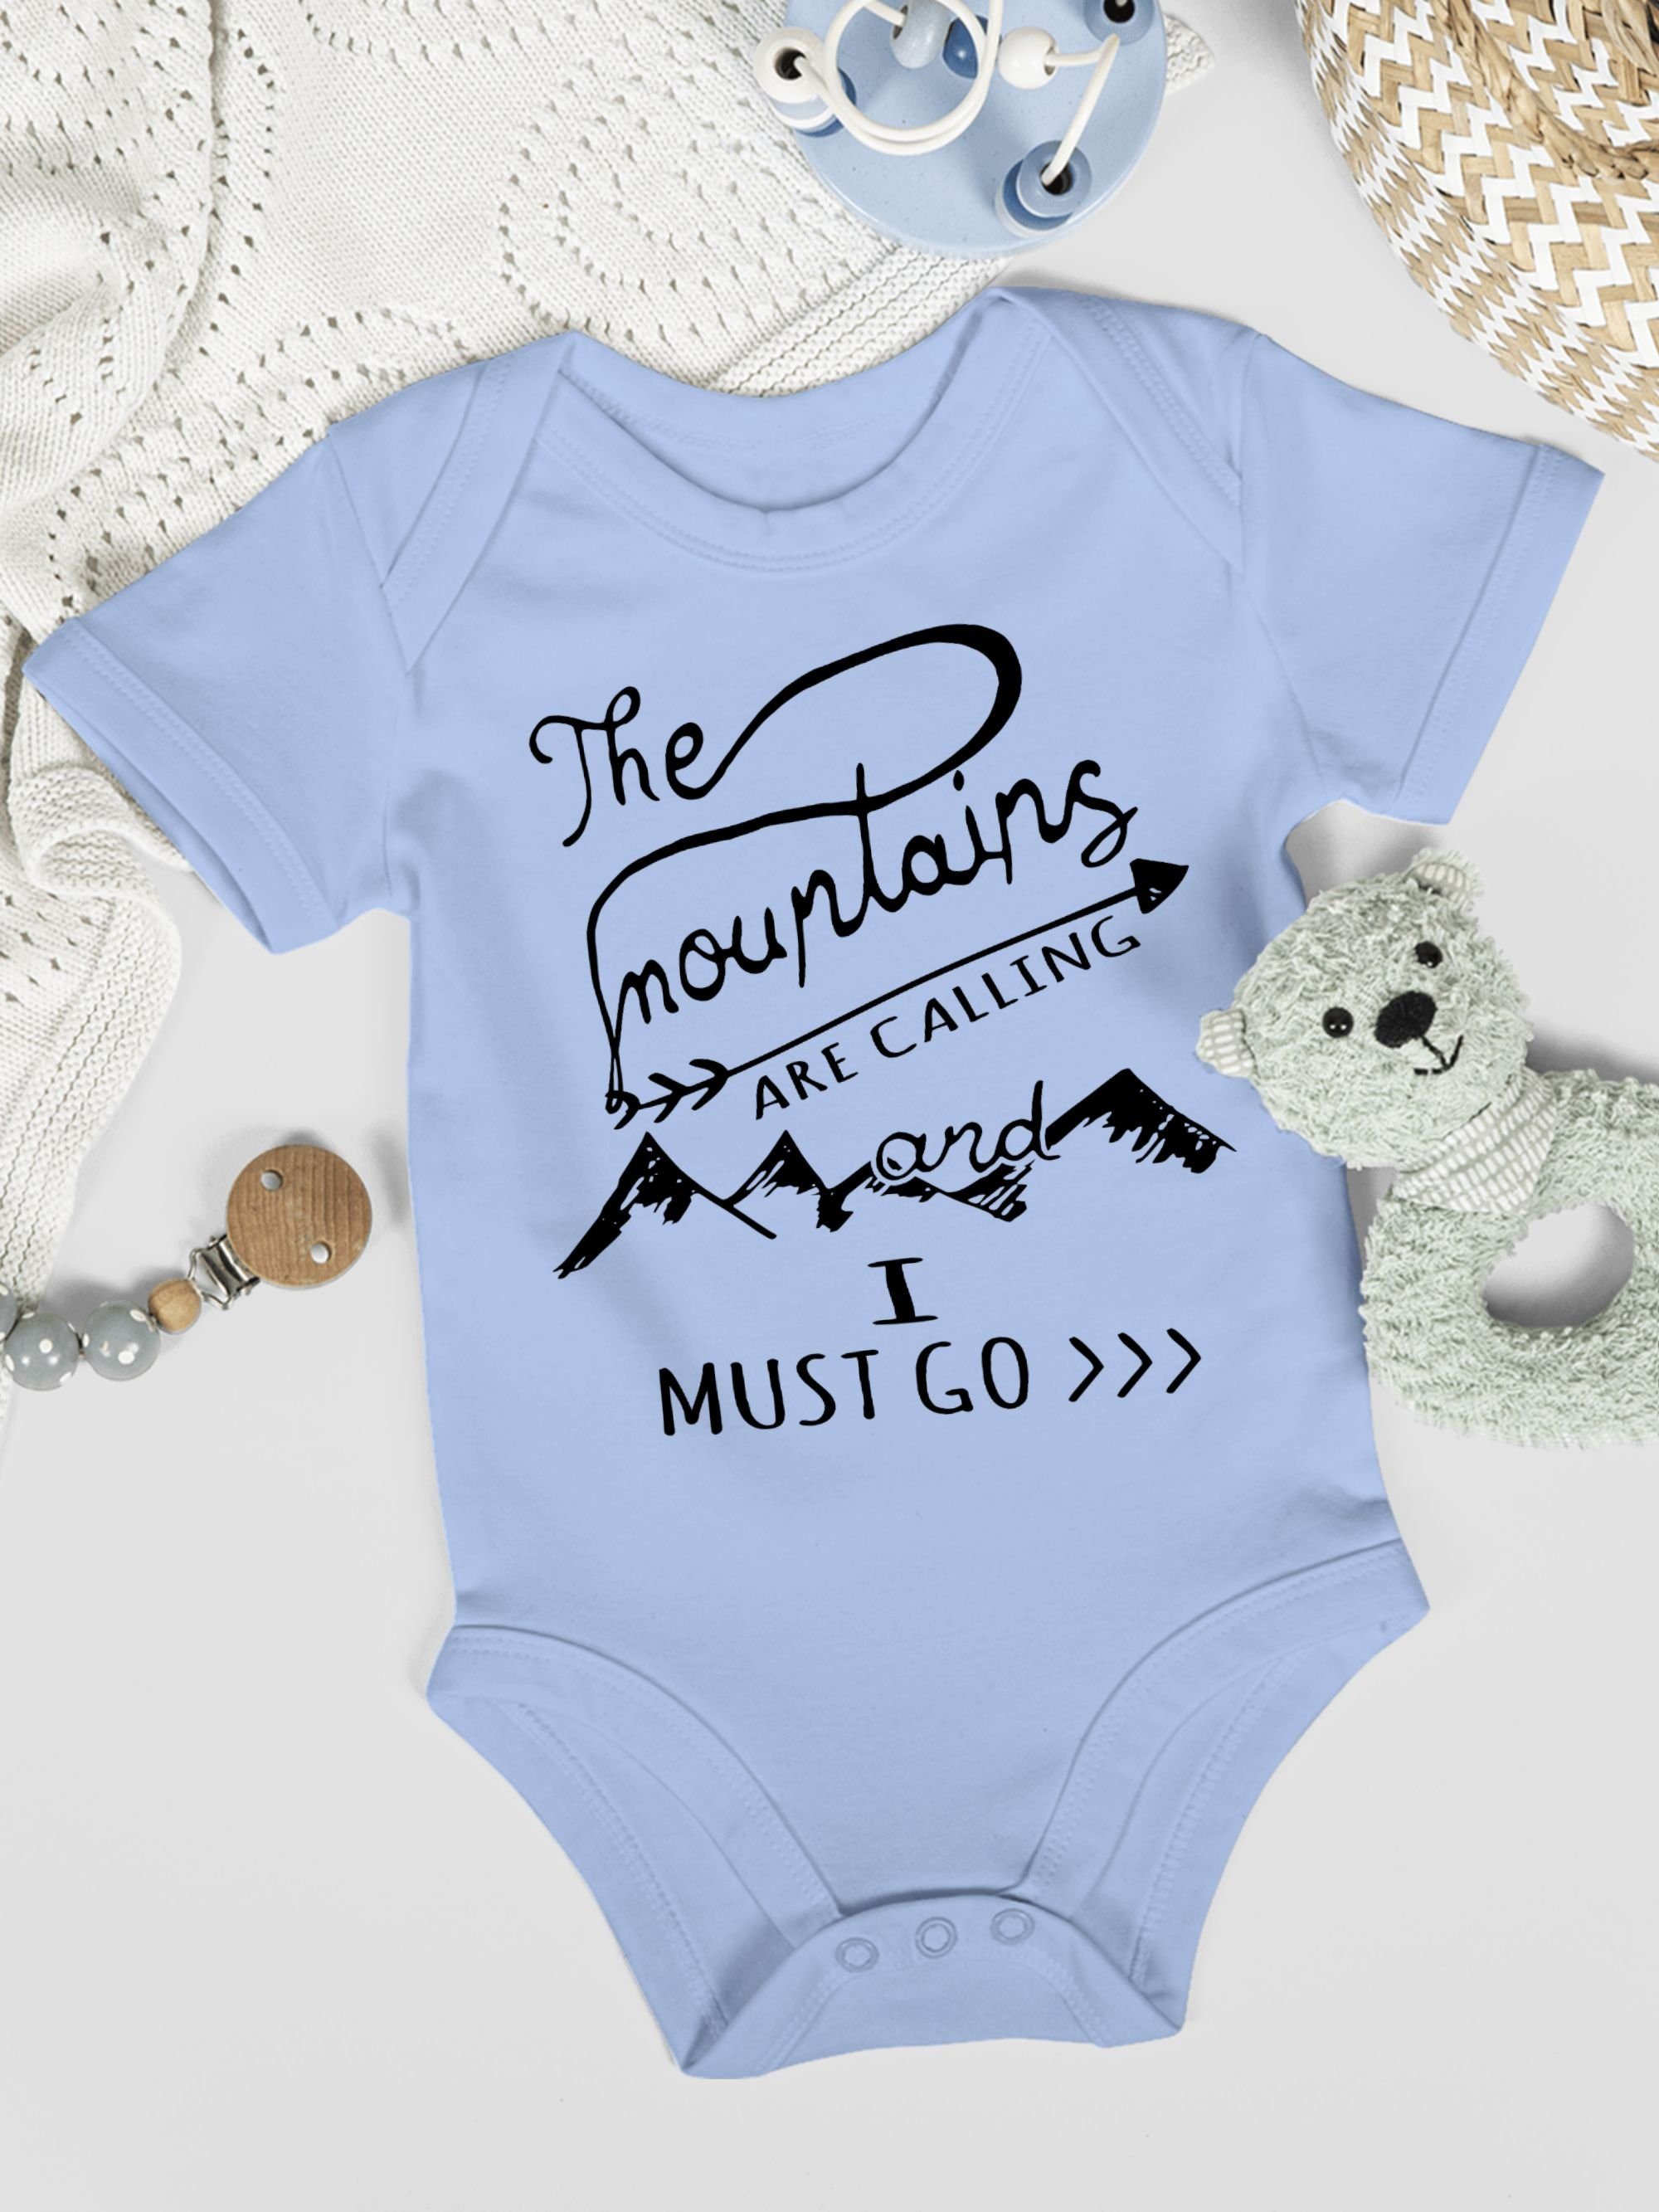 The Mountains Aktuelle Shirtracer Shirtbody 2 calling Babyblau are Baby Trends